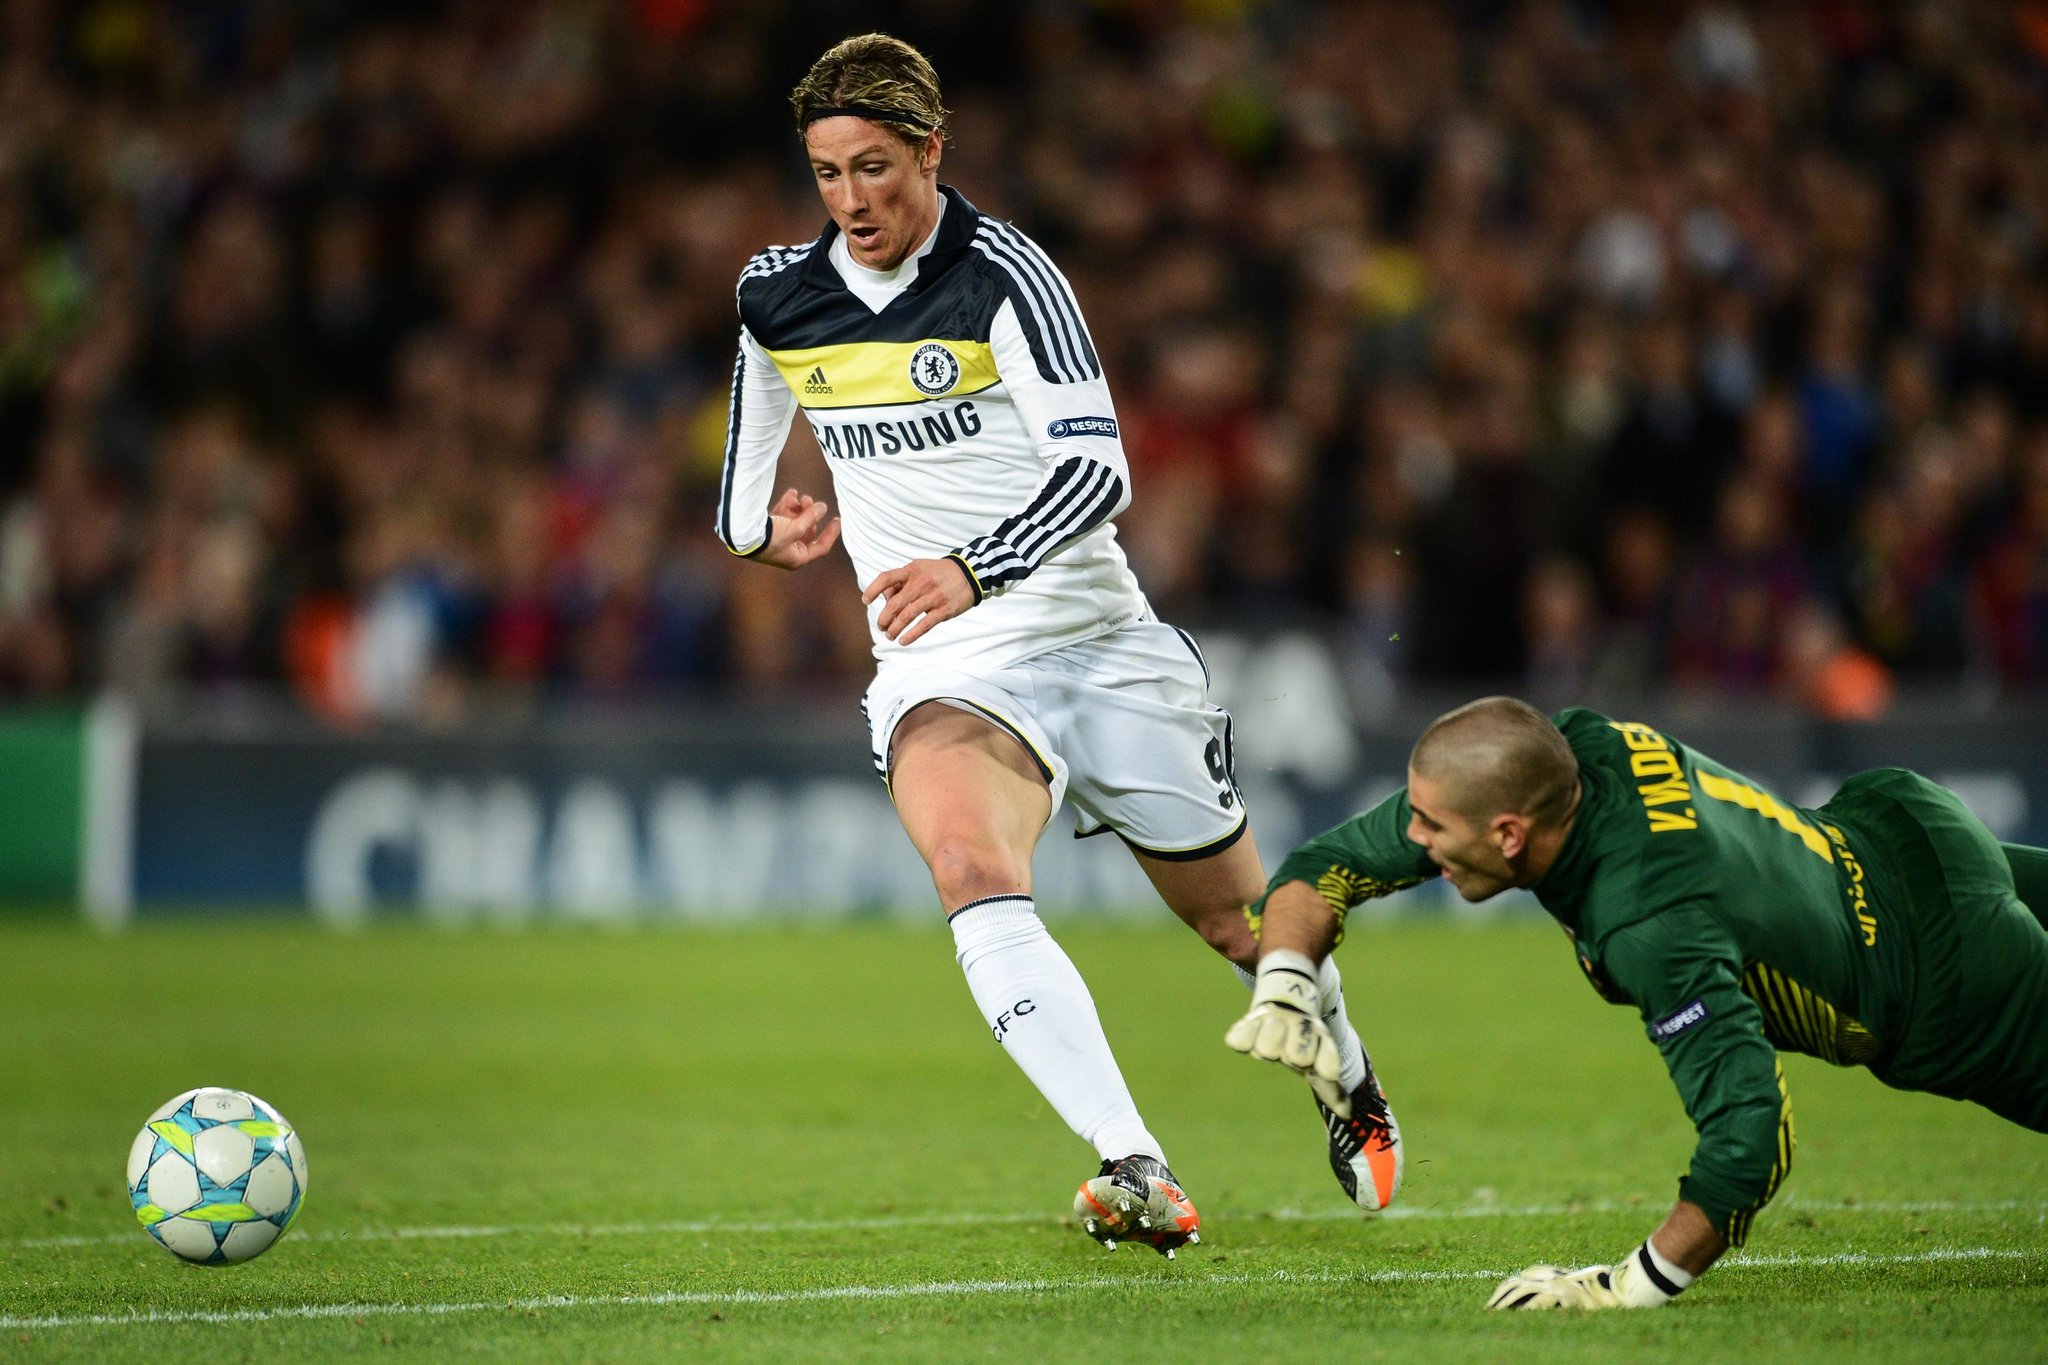 Happy birthday to Fernando Torres who turns 36 today ! This picture speaks everything  